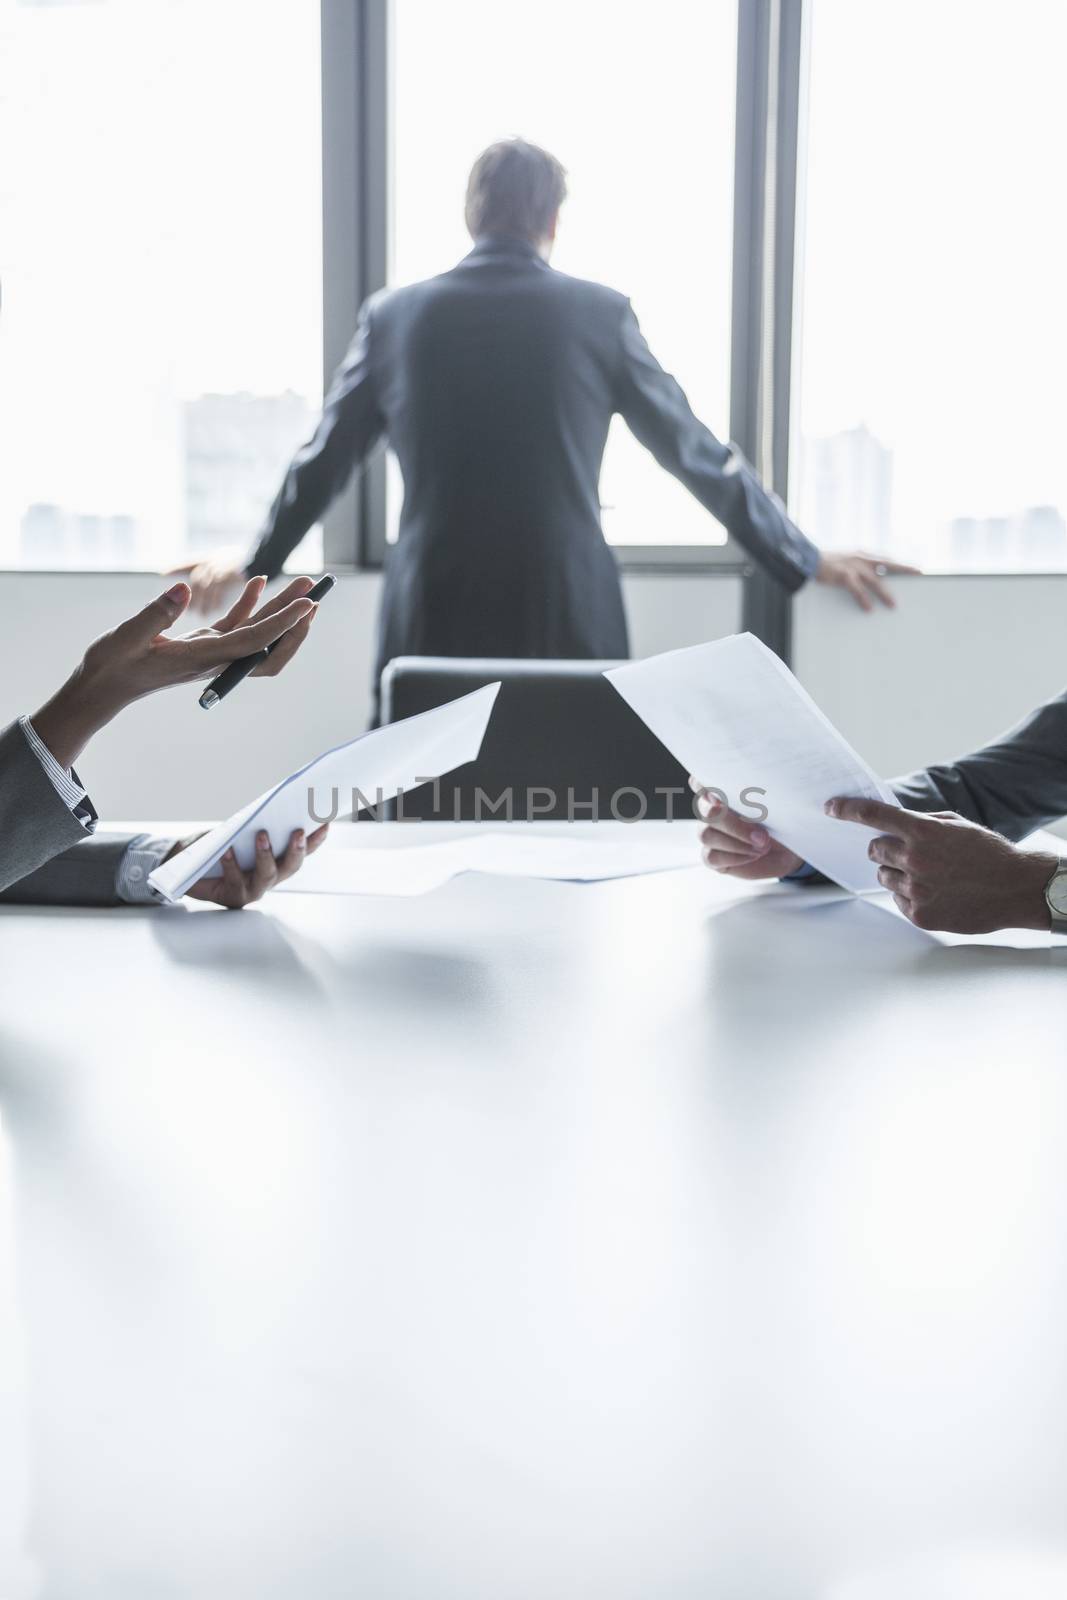 Two business people discussing and gesturing over the table while another looks out the window, hands only